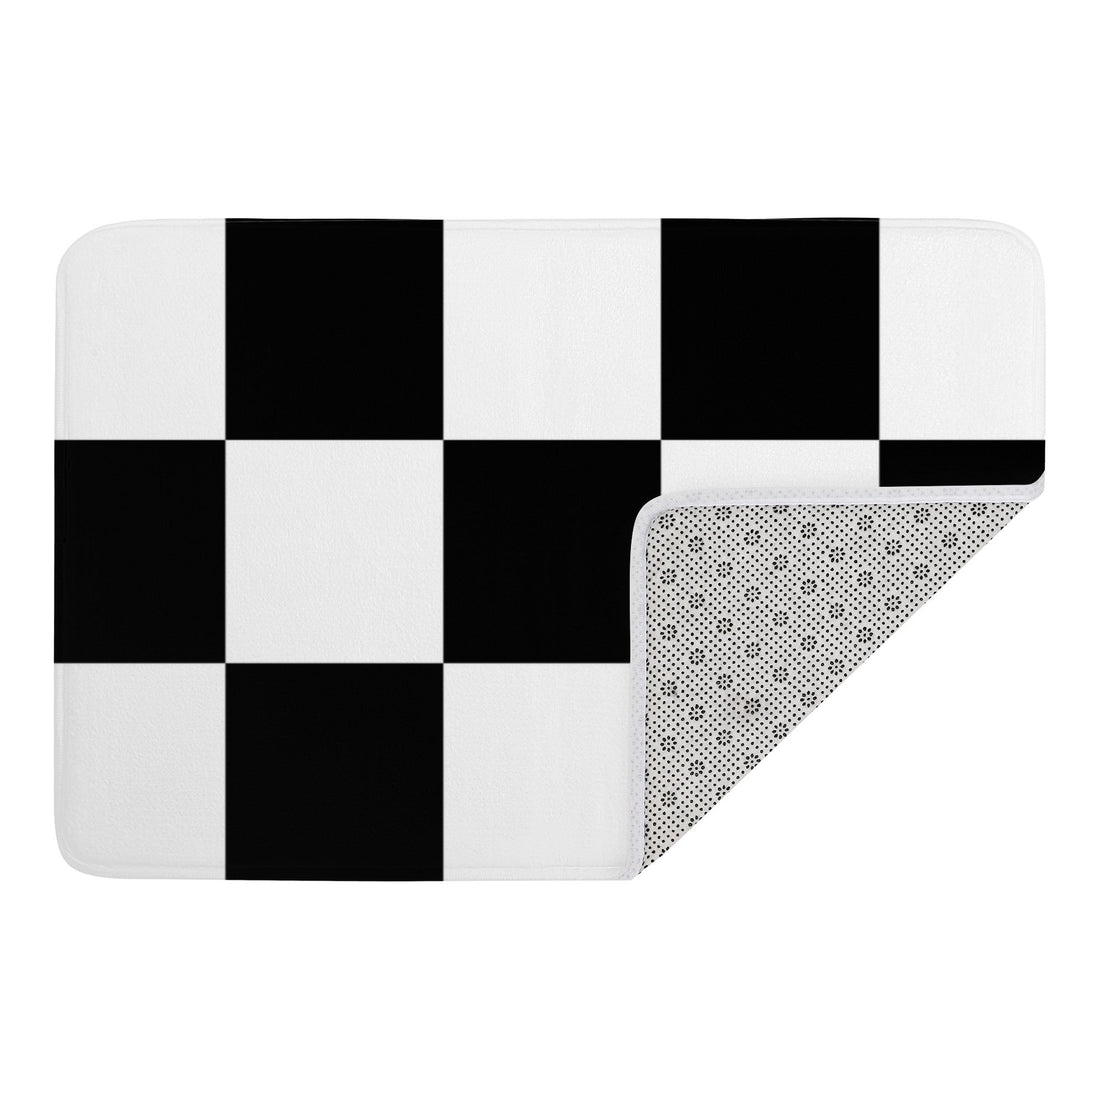 Black and White Doormat Home-clothes-jewelry